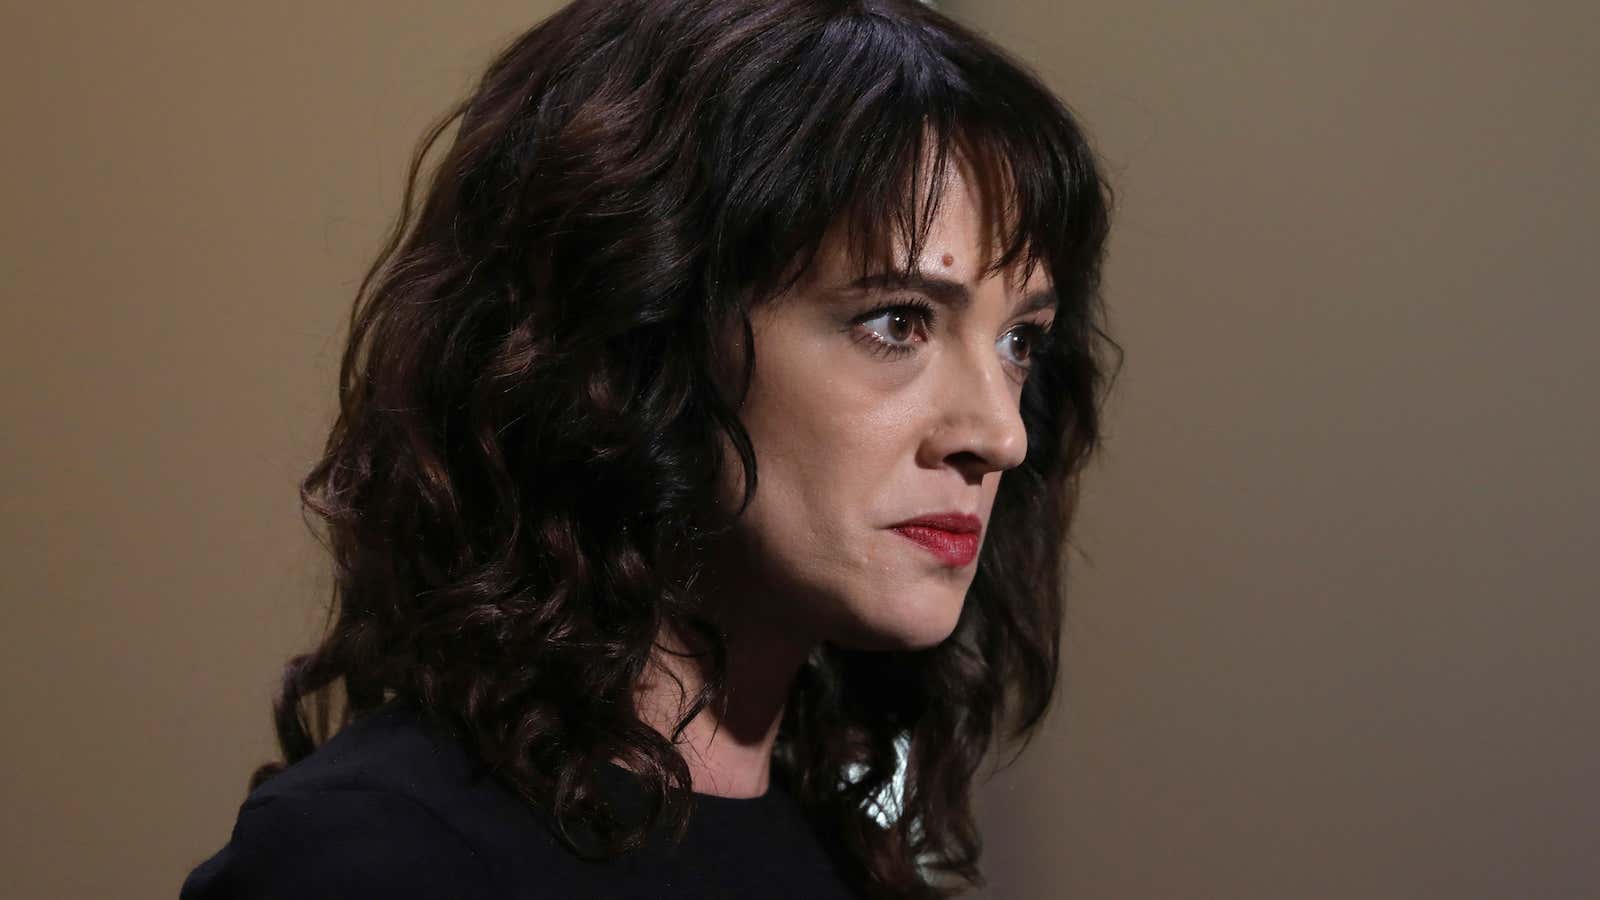 Asia Argento, a survivor  and an alleged assaulter. Both can be true.